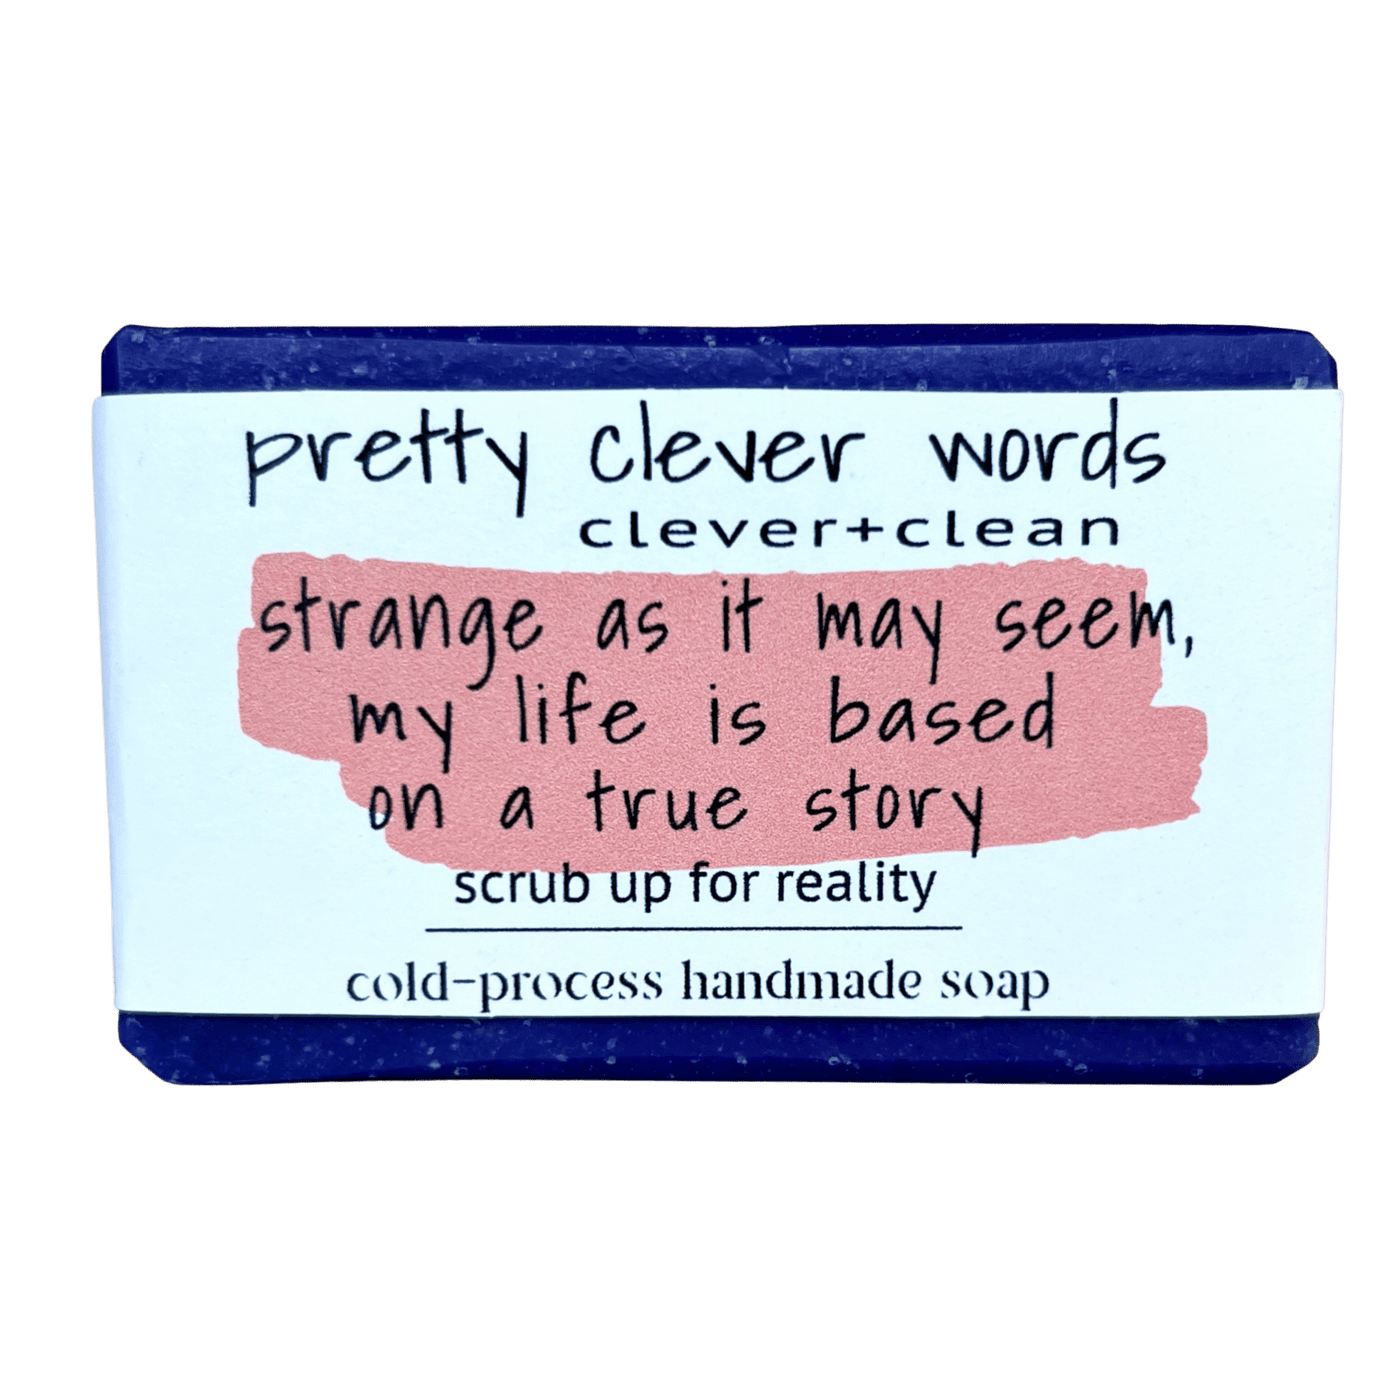 clever+clean oakmoss lavender - my life is based on a true story